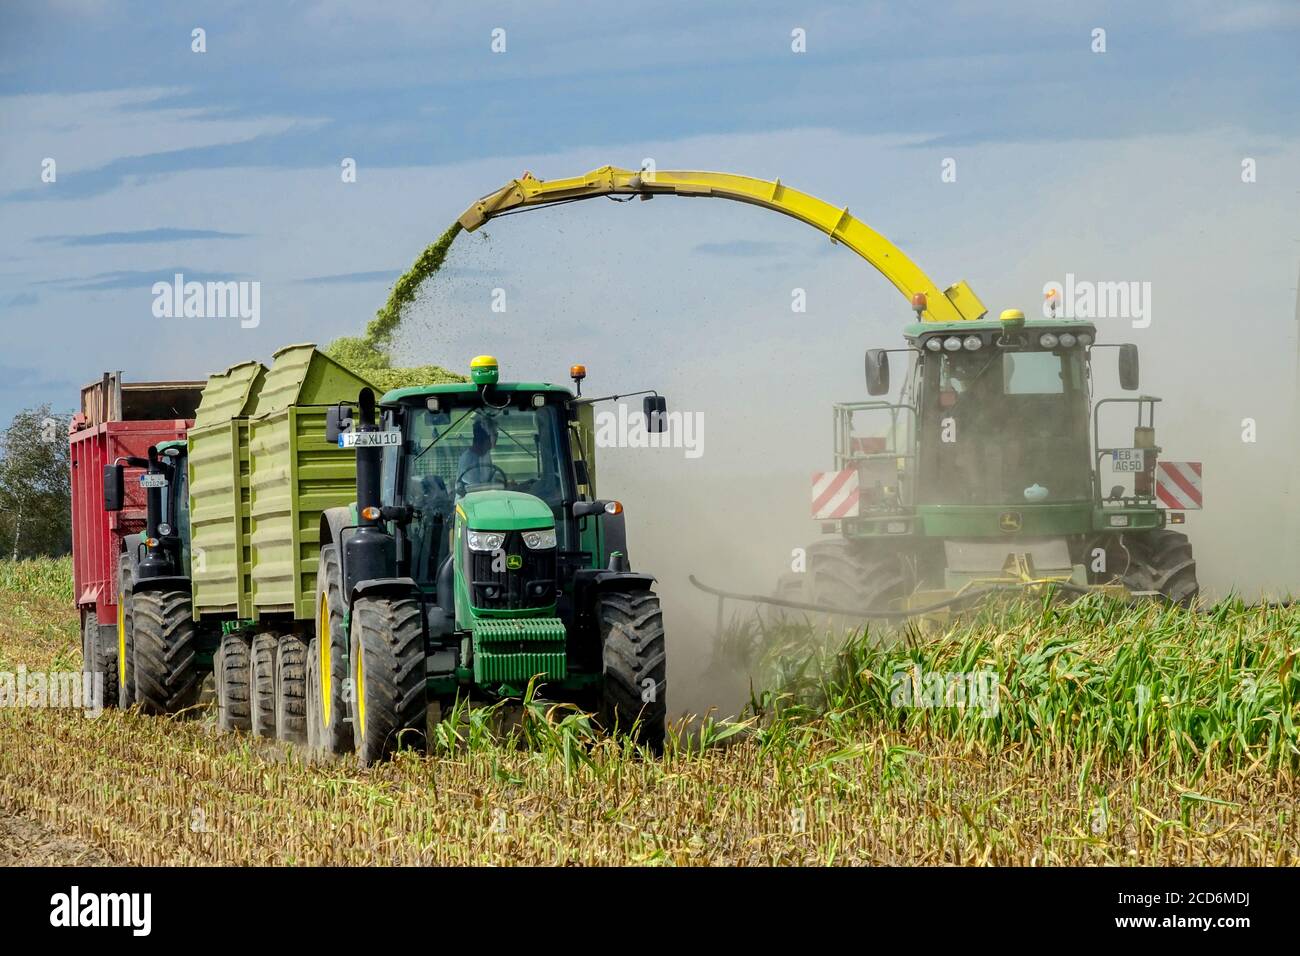 Corn harvest. Combine harvester works on a corn field. The maize silage is pumped directly into a tractor-trailer Germany agriculture Germany farming Stock Photo